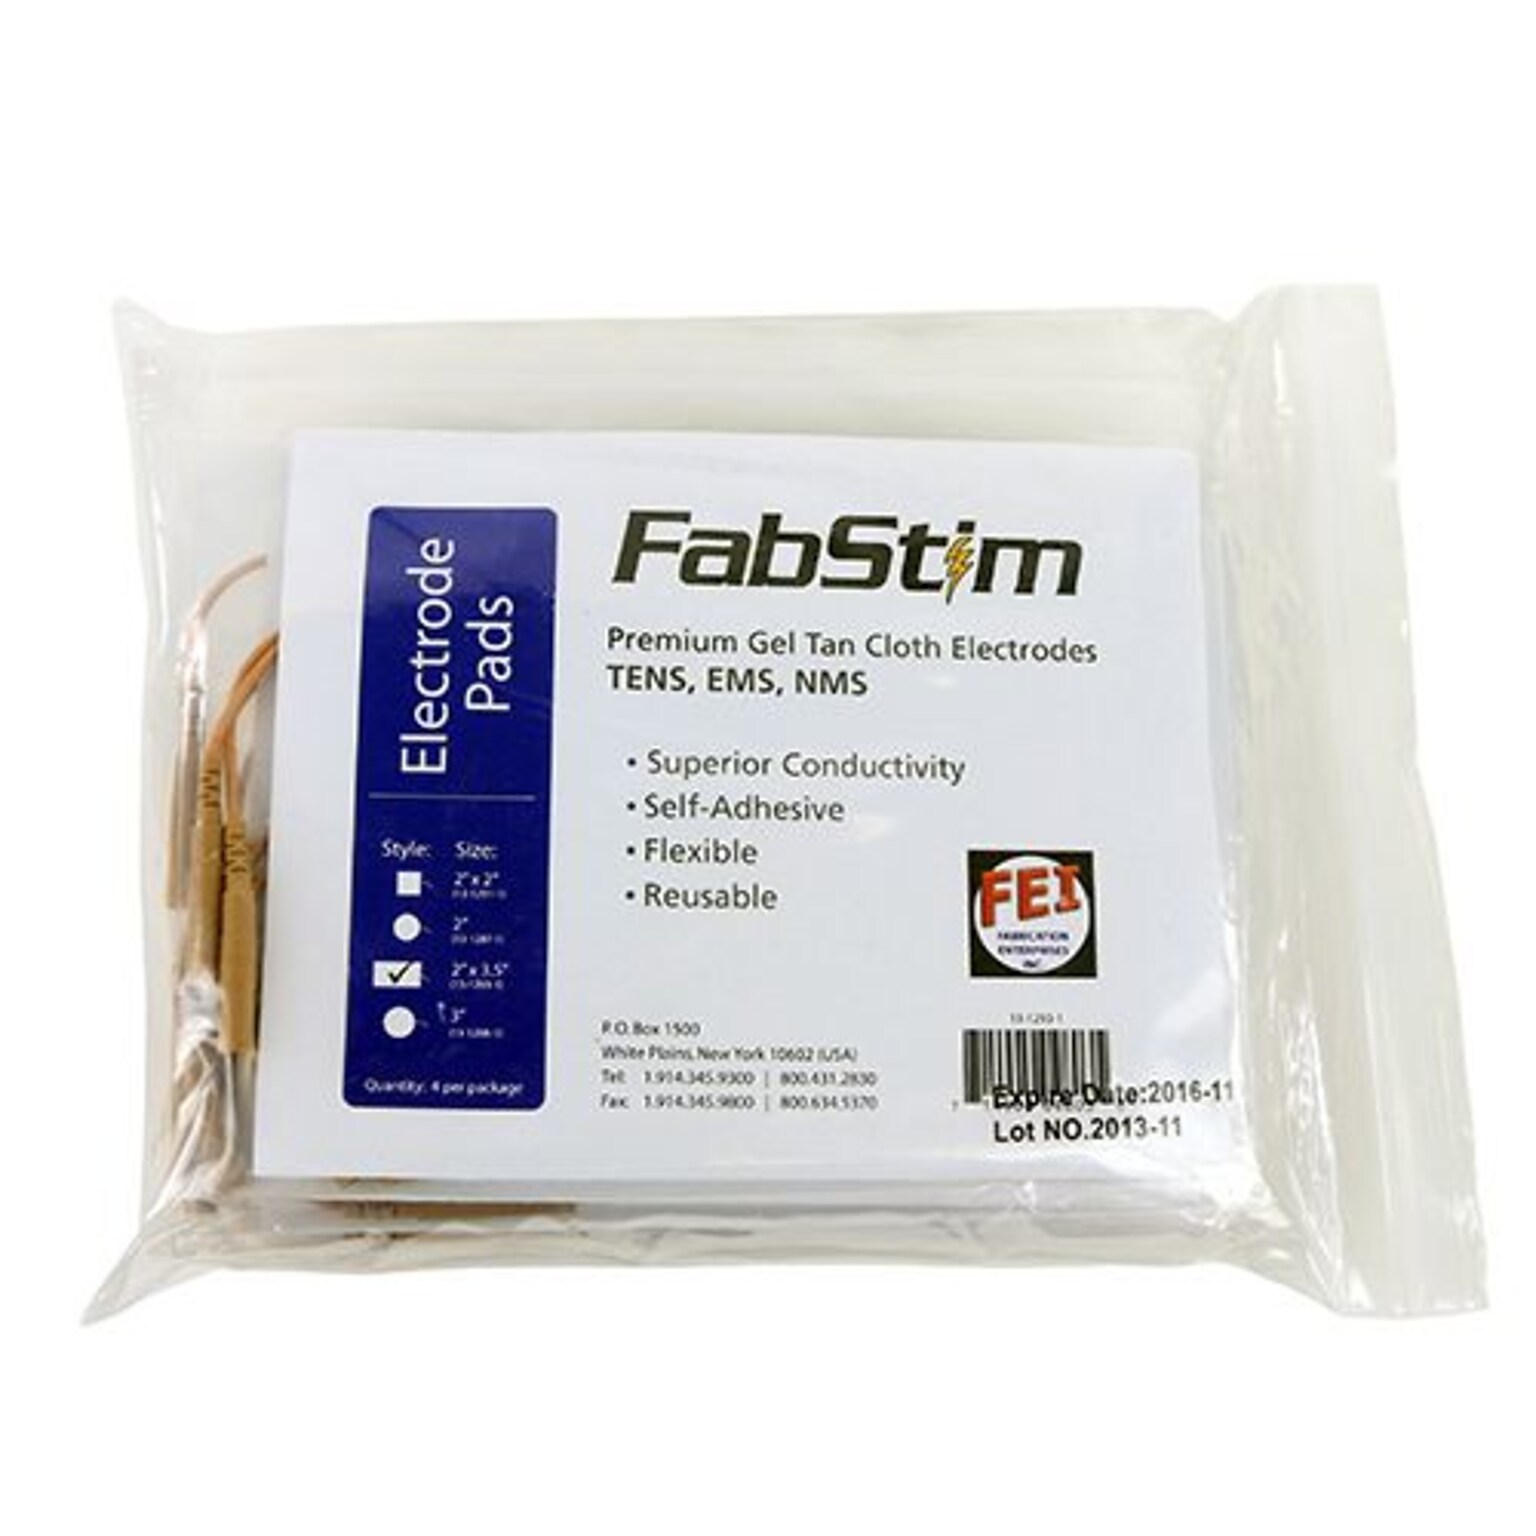 FabStim TENS Electrodes, 2 x 3.5 Rectangle, Pre-Gelled, Self-Adhesive, 40/Pack (13-1293-10)